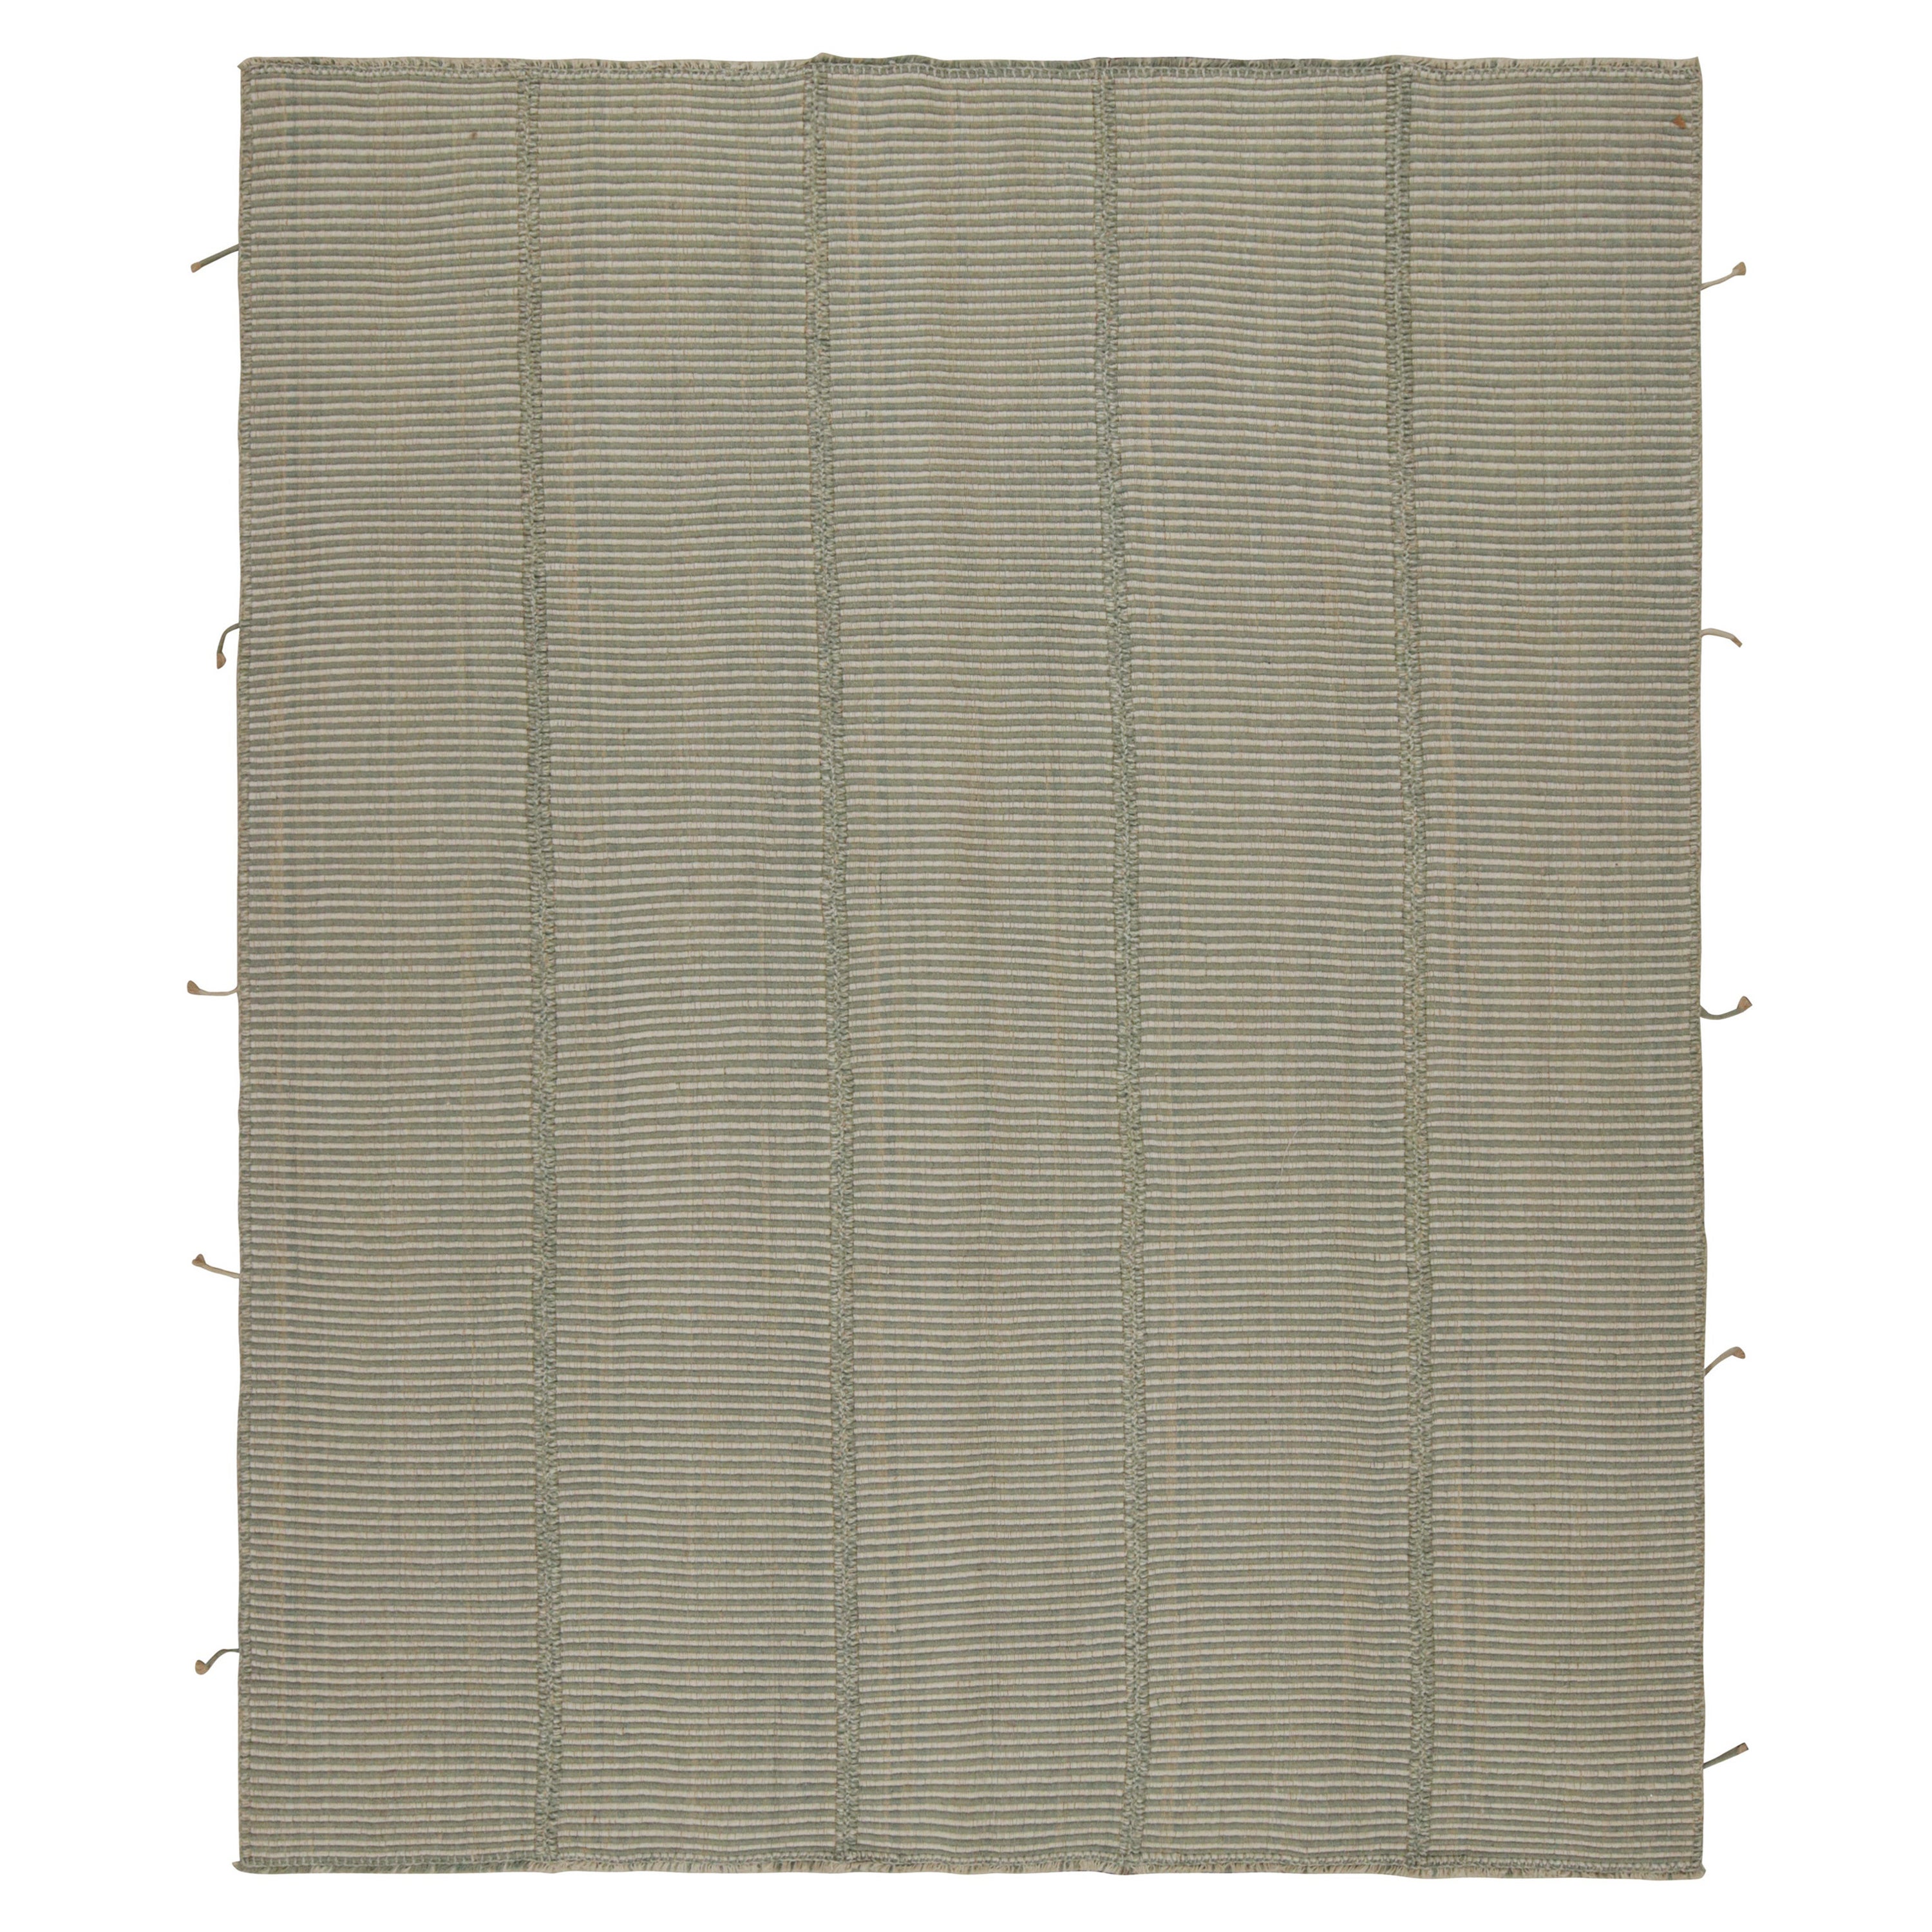 Rug & Kilim’s Modern Kilim in Gray with Stripes & Beige-Blue Accents For Sale